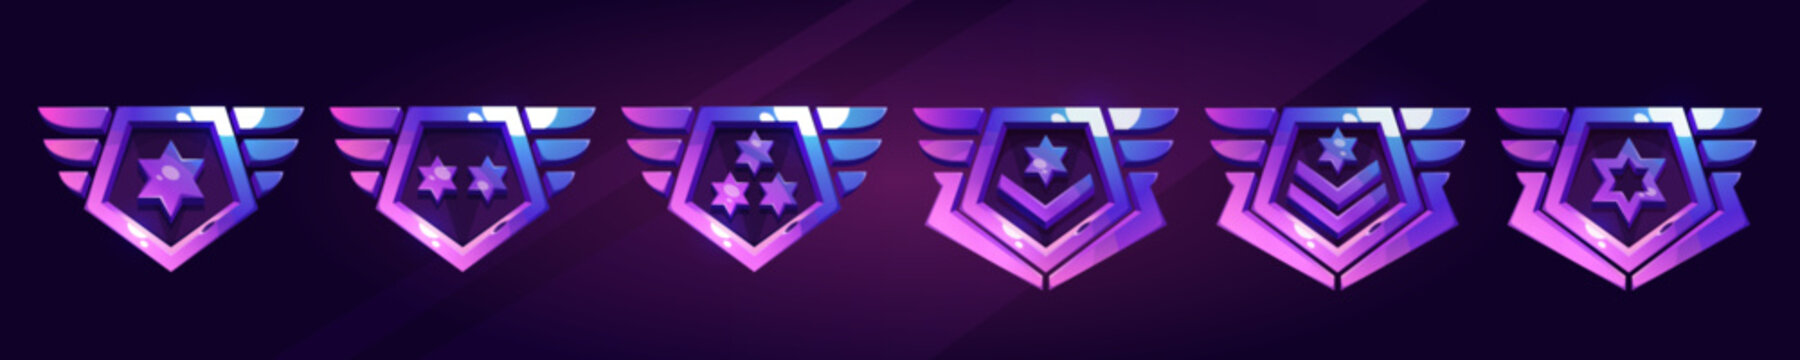 Set of military game rank badges isolated on background. Vector cartoon illustration of shiny metal pentagonal insignia medals with stars, chevrons, wings. Gui progress symbol. Award for achievement